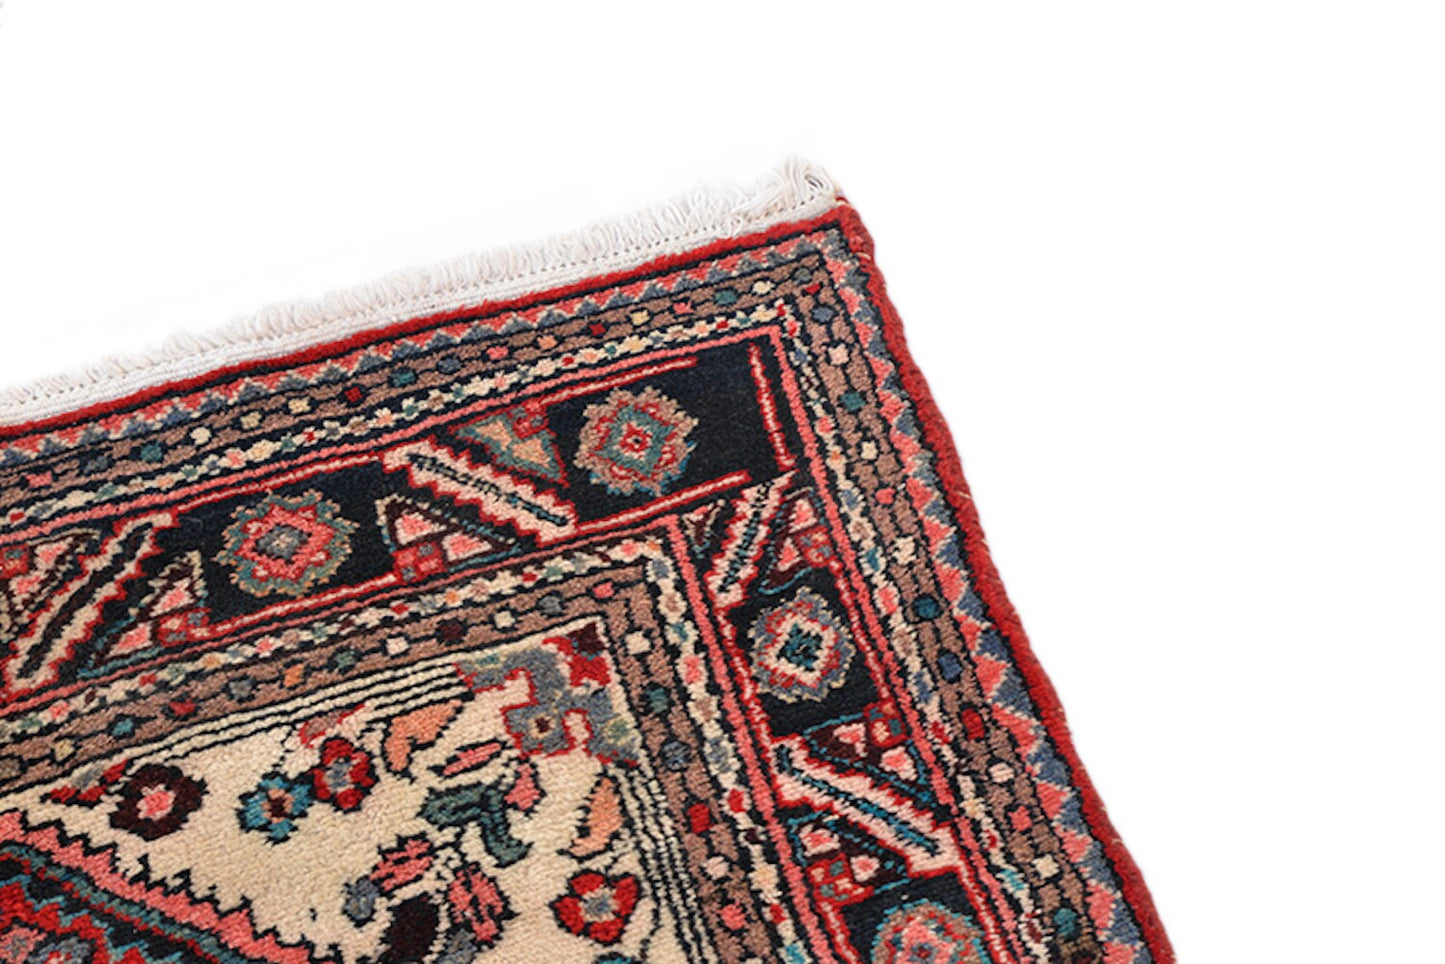 Red Oriental Runner Rug, Long 3 x 10 Feet, Persian Style Design, Hand knotted Wool Antique Runner